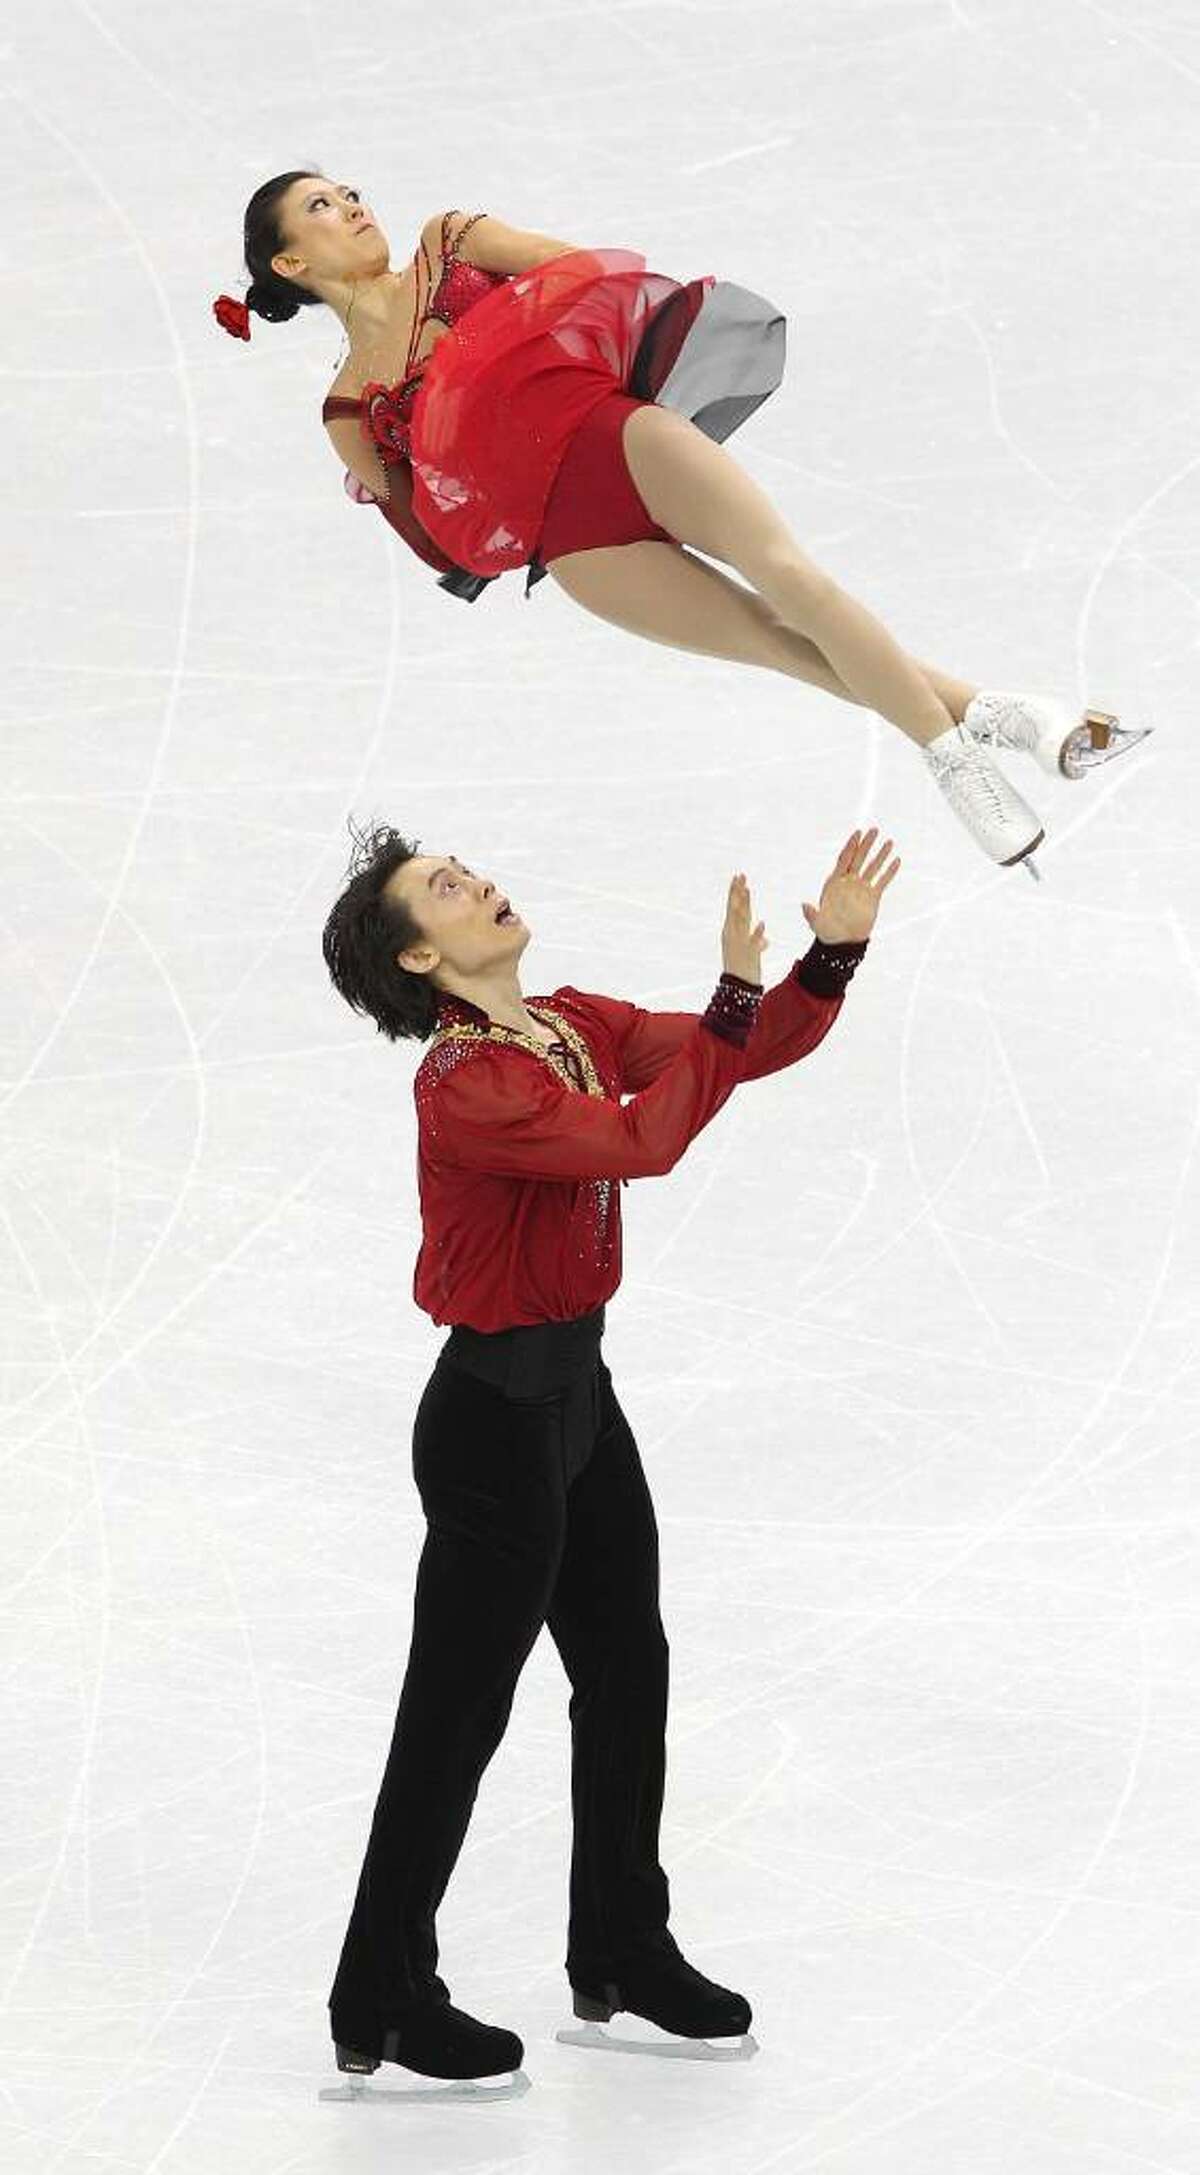 VANCOUVER, BC - FEBRUARY 15: Qing Pang and Jian Tong of China compete in the Figure Skating Pairs Free Program on day 4 of the Vancouver 2010 Winter Olympics at the Pacific Coliseum on February 15, 2010 in Vancouver, Canada. (Photo by Cameron Spencer/Getty Images) *** Local Caption *** Qing Pang;Jian Tong